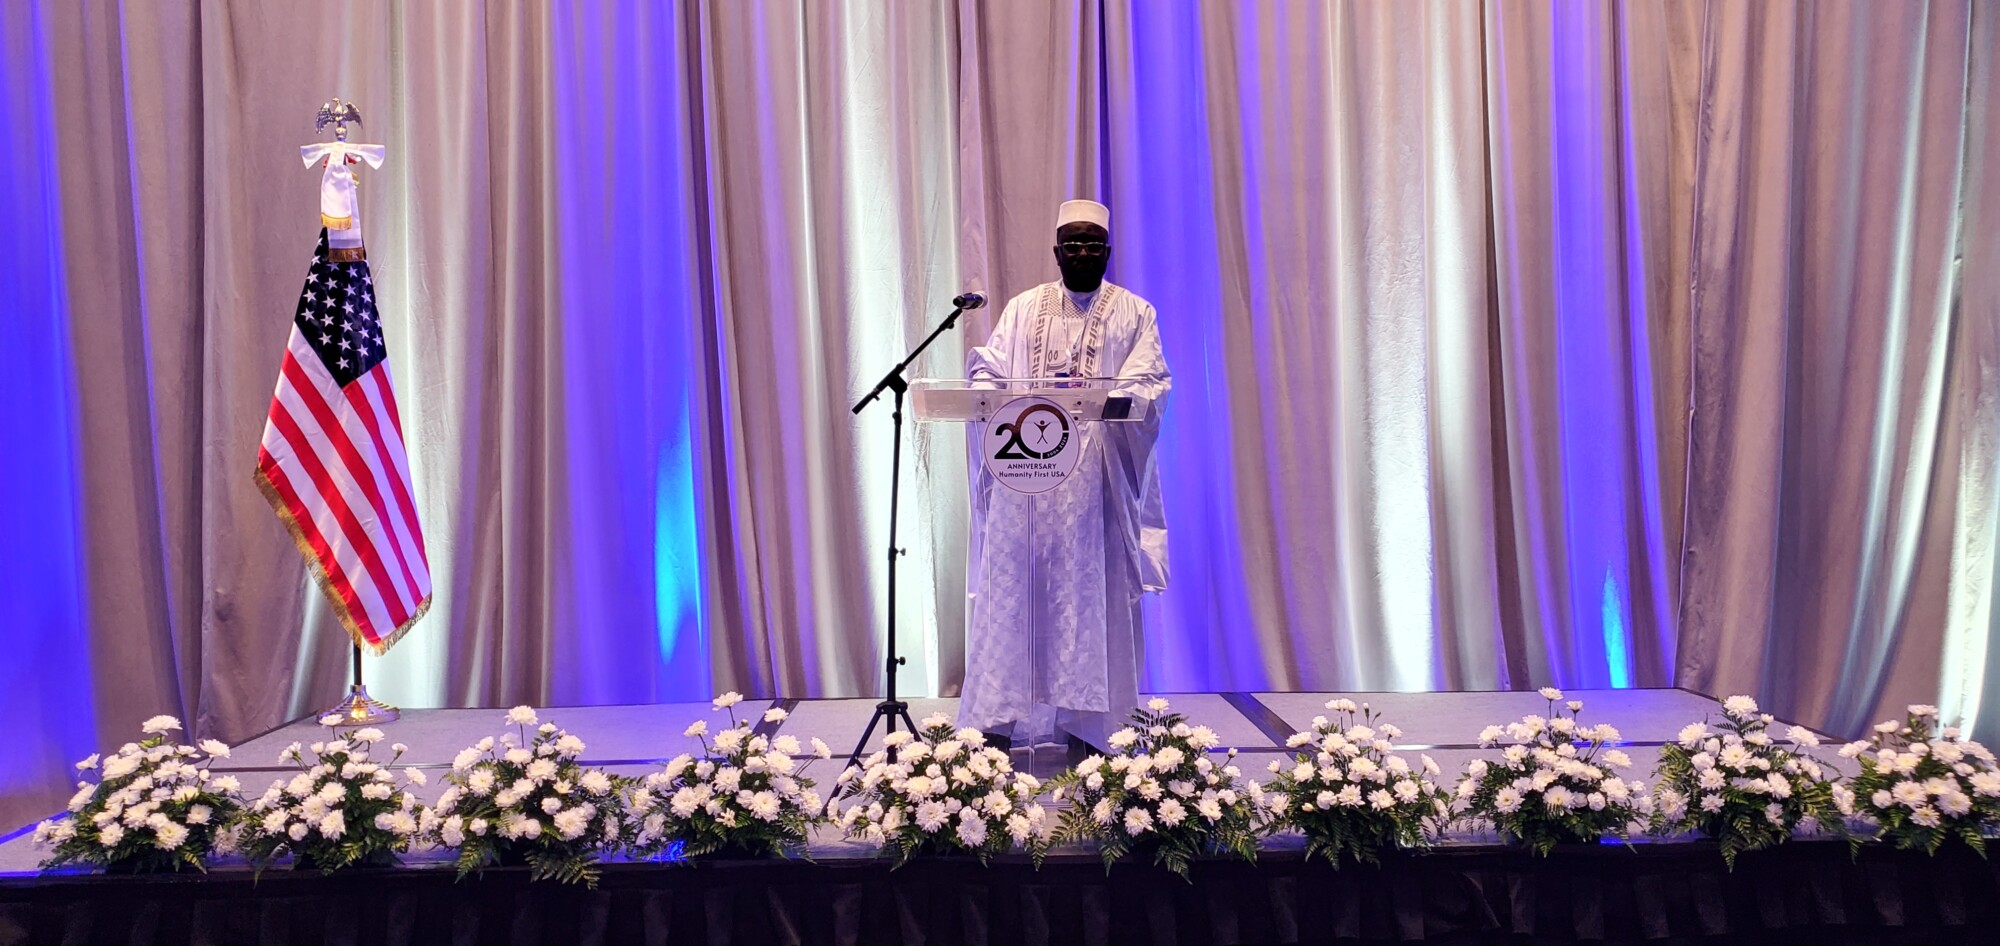 A man dressed in a white robe and cap of Western African style stands at the podium of a stage with white curtains behind it, white flowers in pots at the front edge, and an American flag on a stand to the viewer's left.